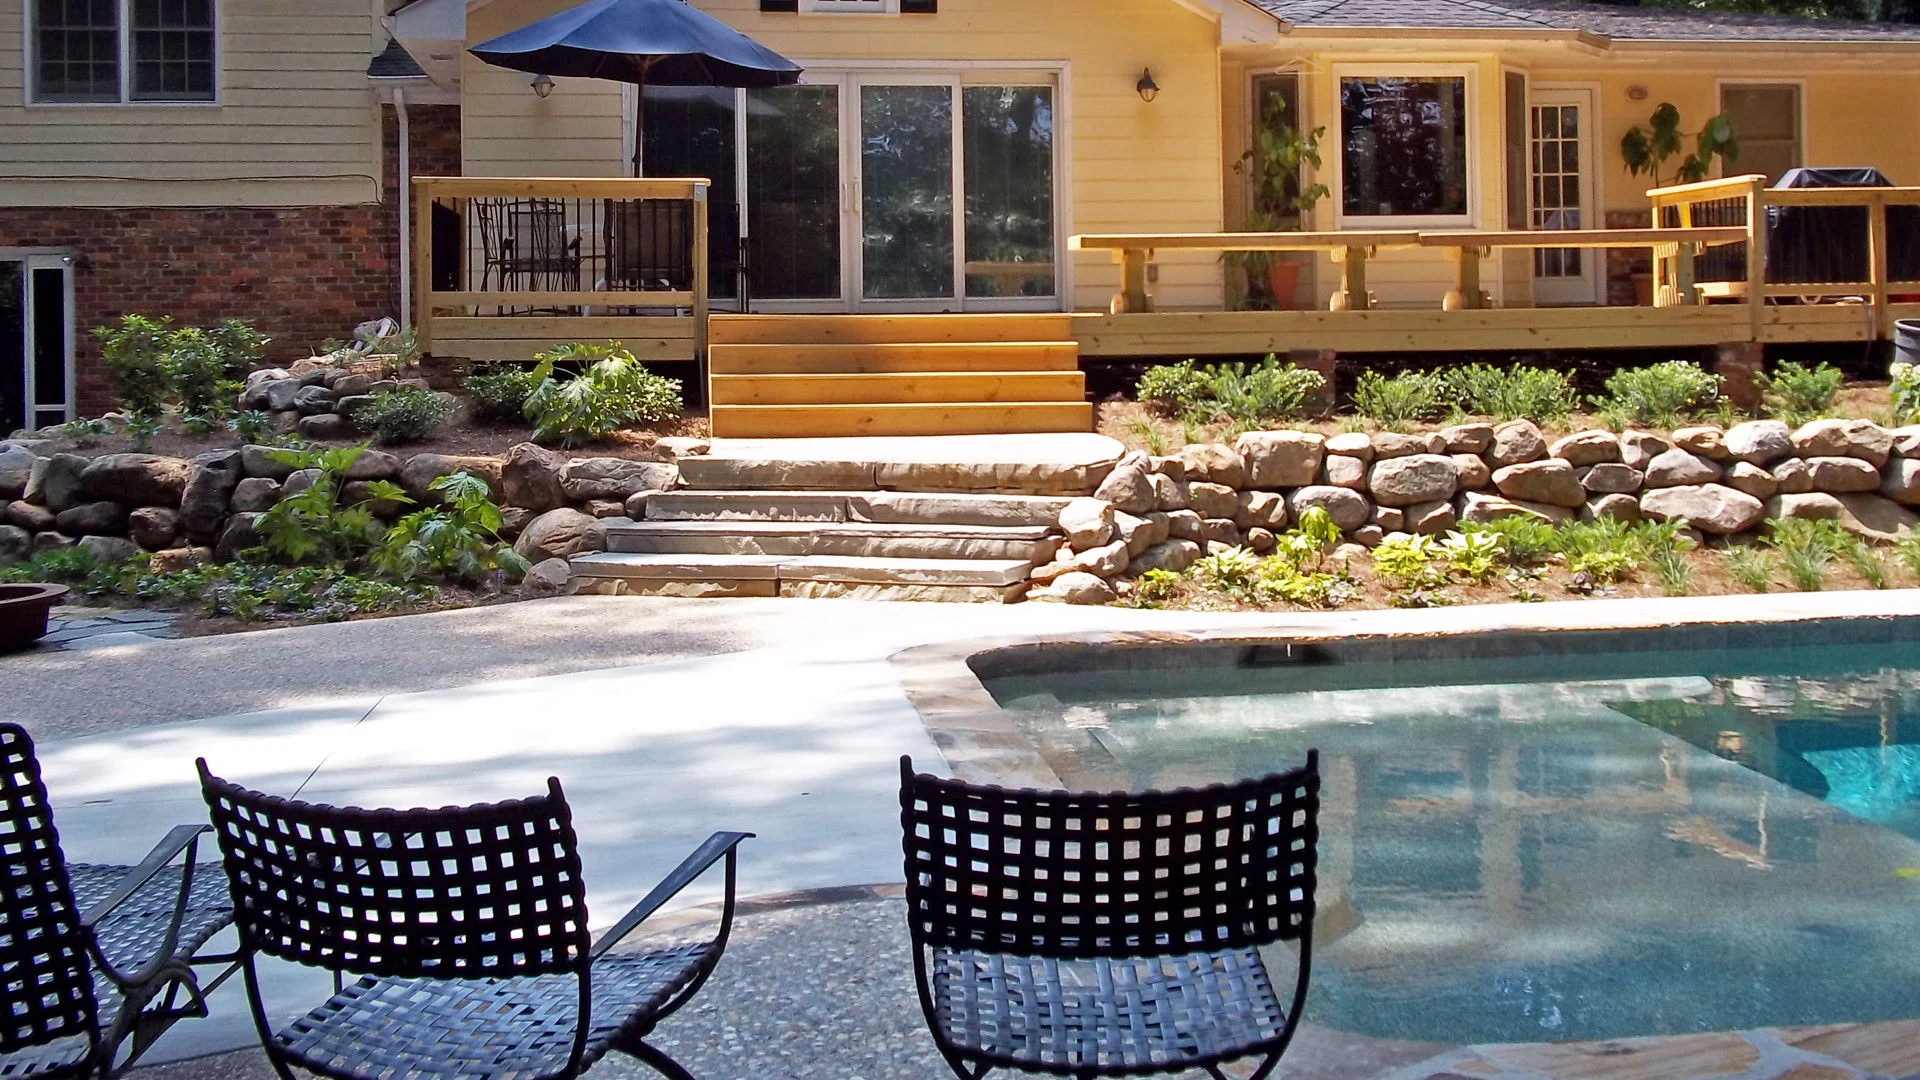 Rock retaining wall with landscaping around a pool at a home in Mableton, GA.